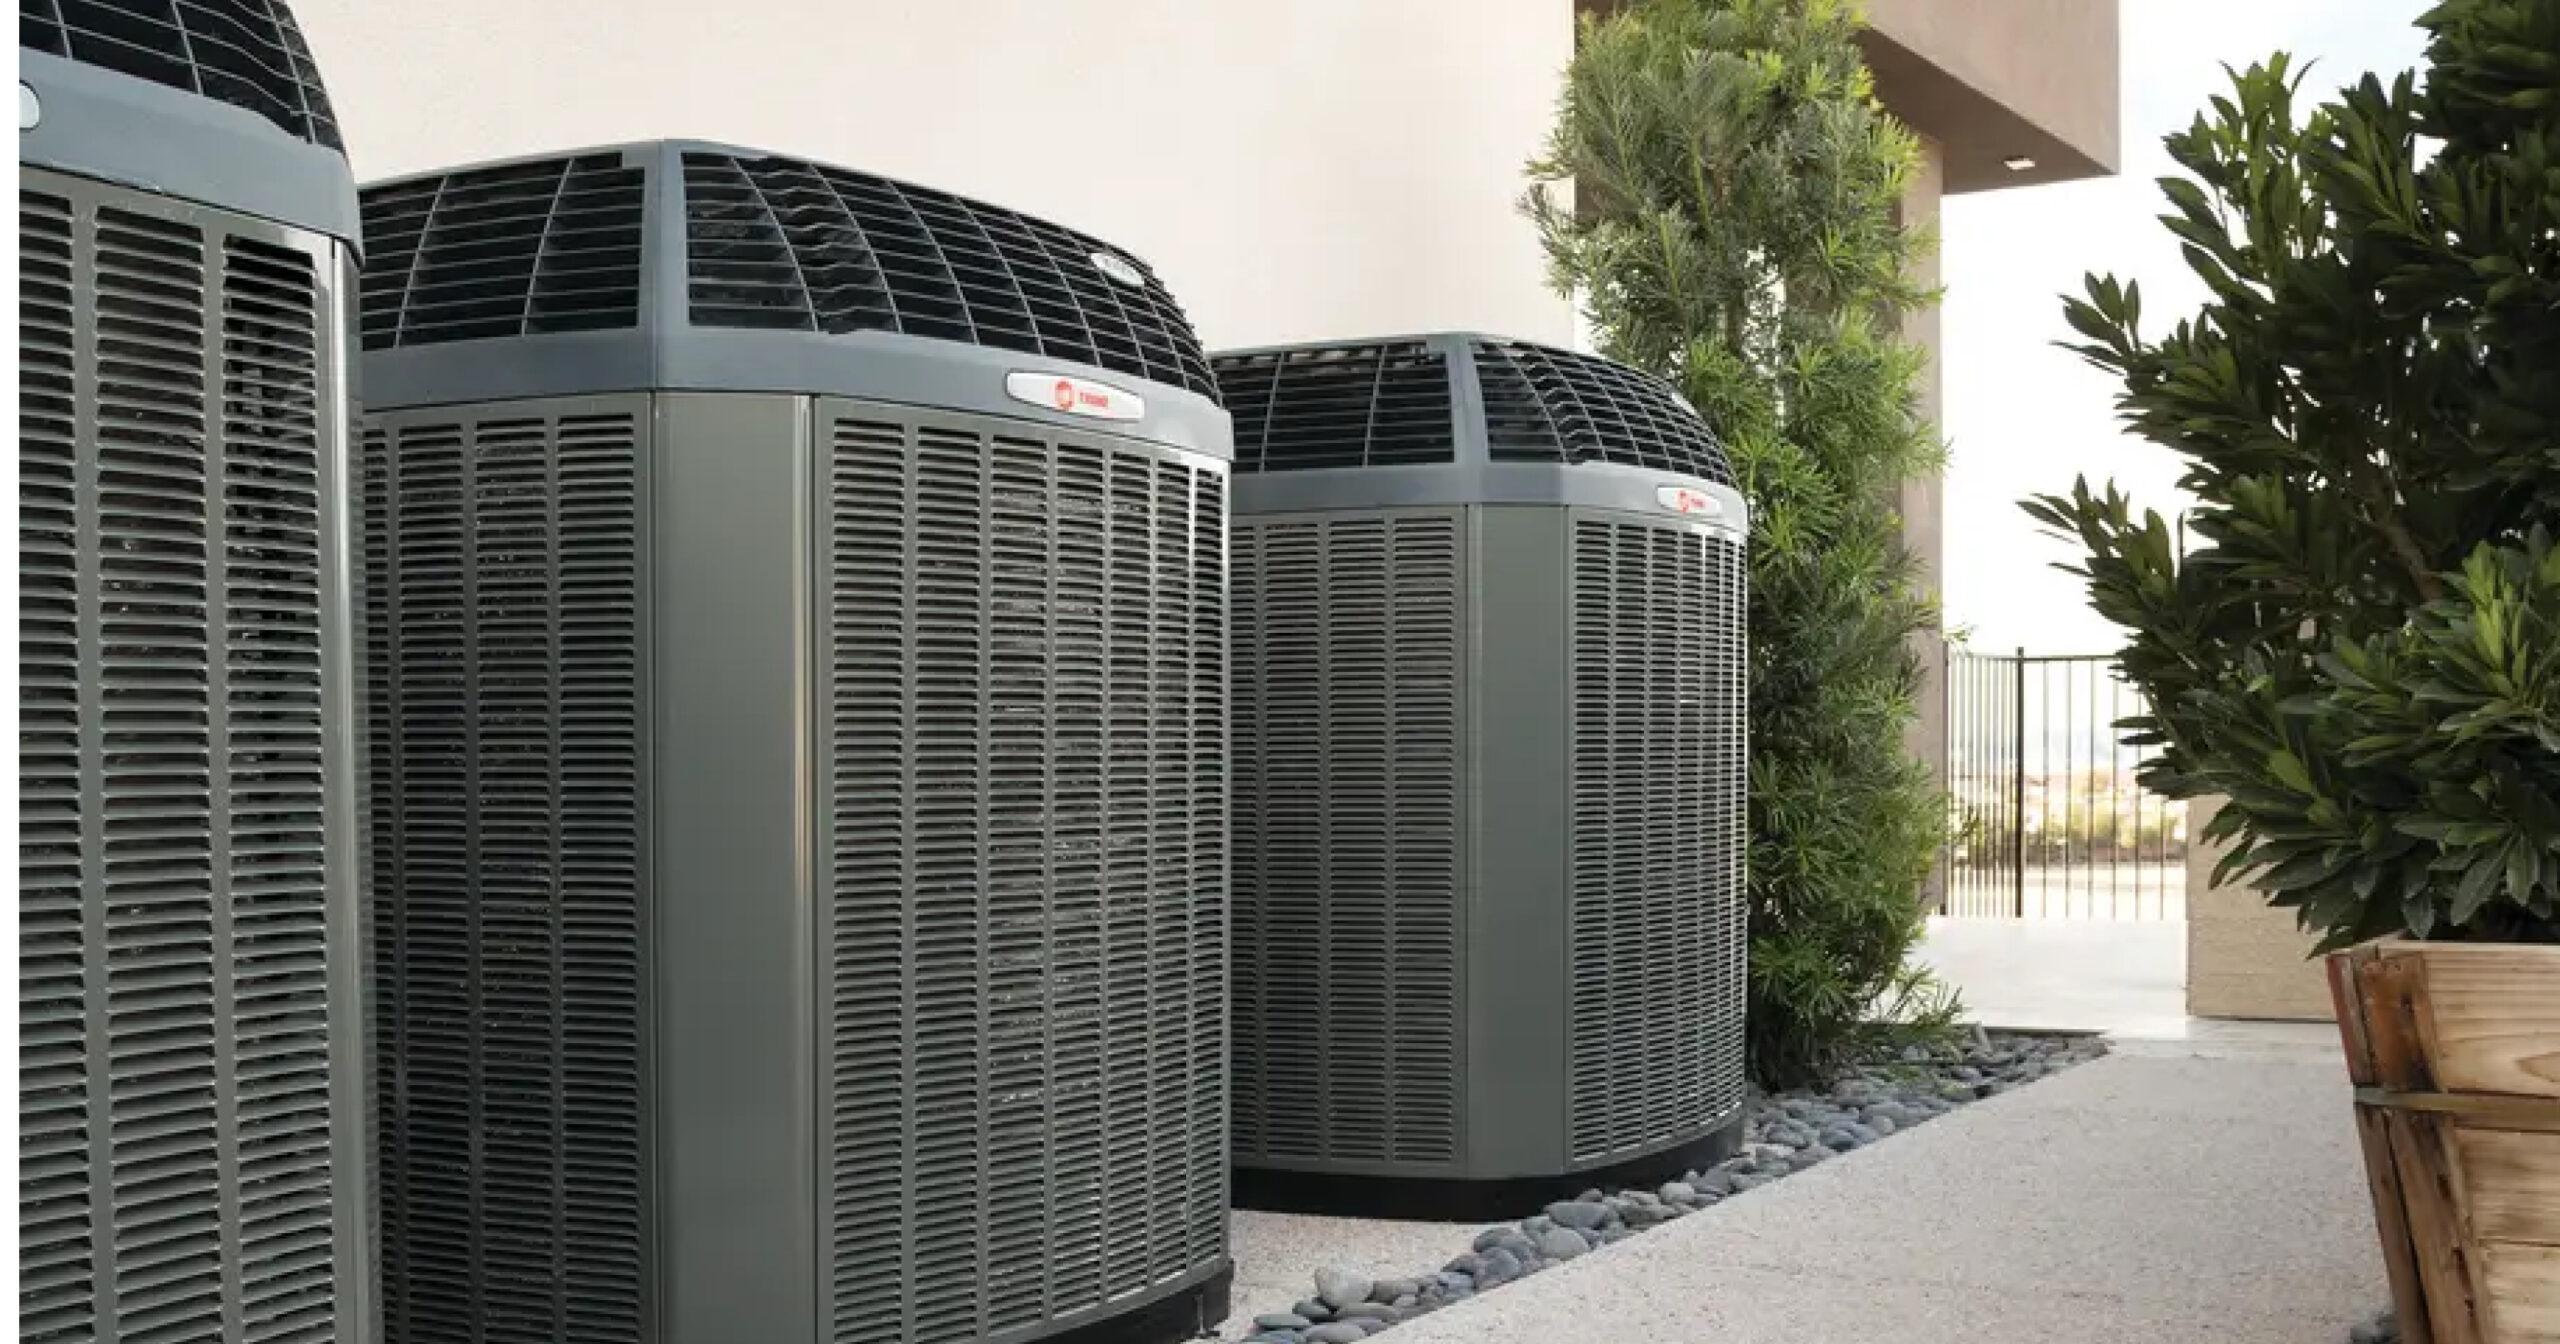 8 Air Conditioning Myths That Are Costing You Money